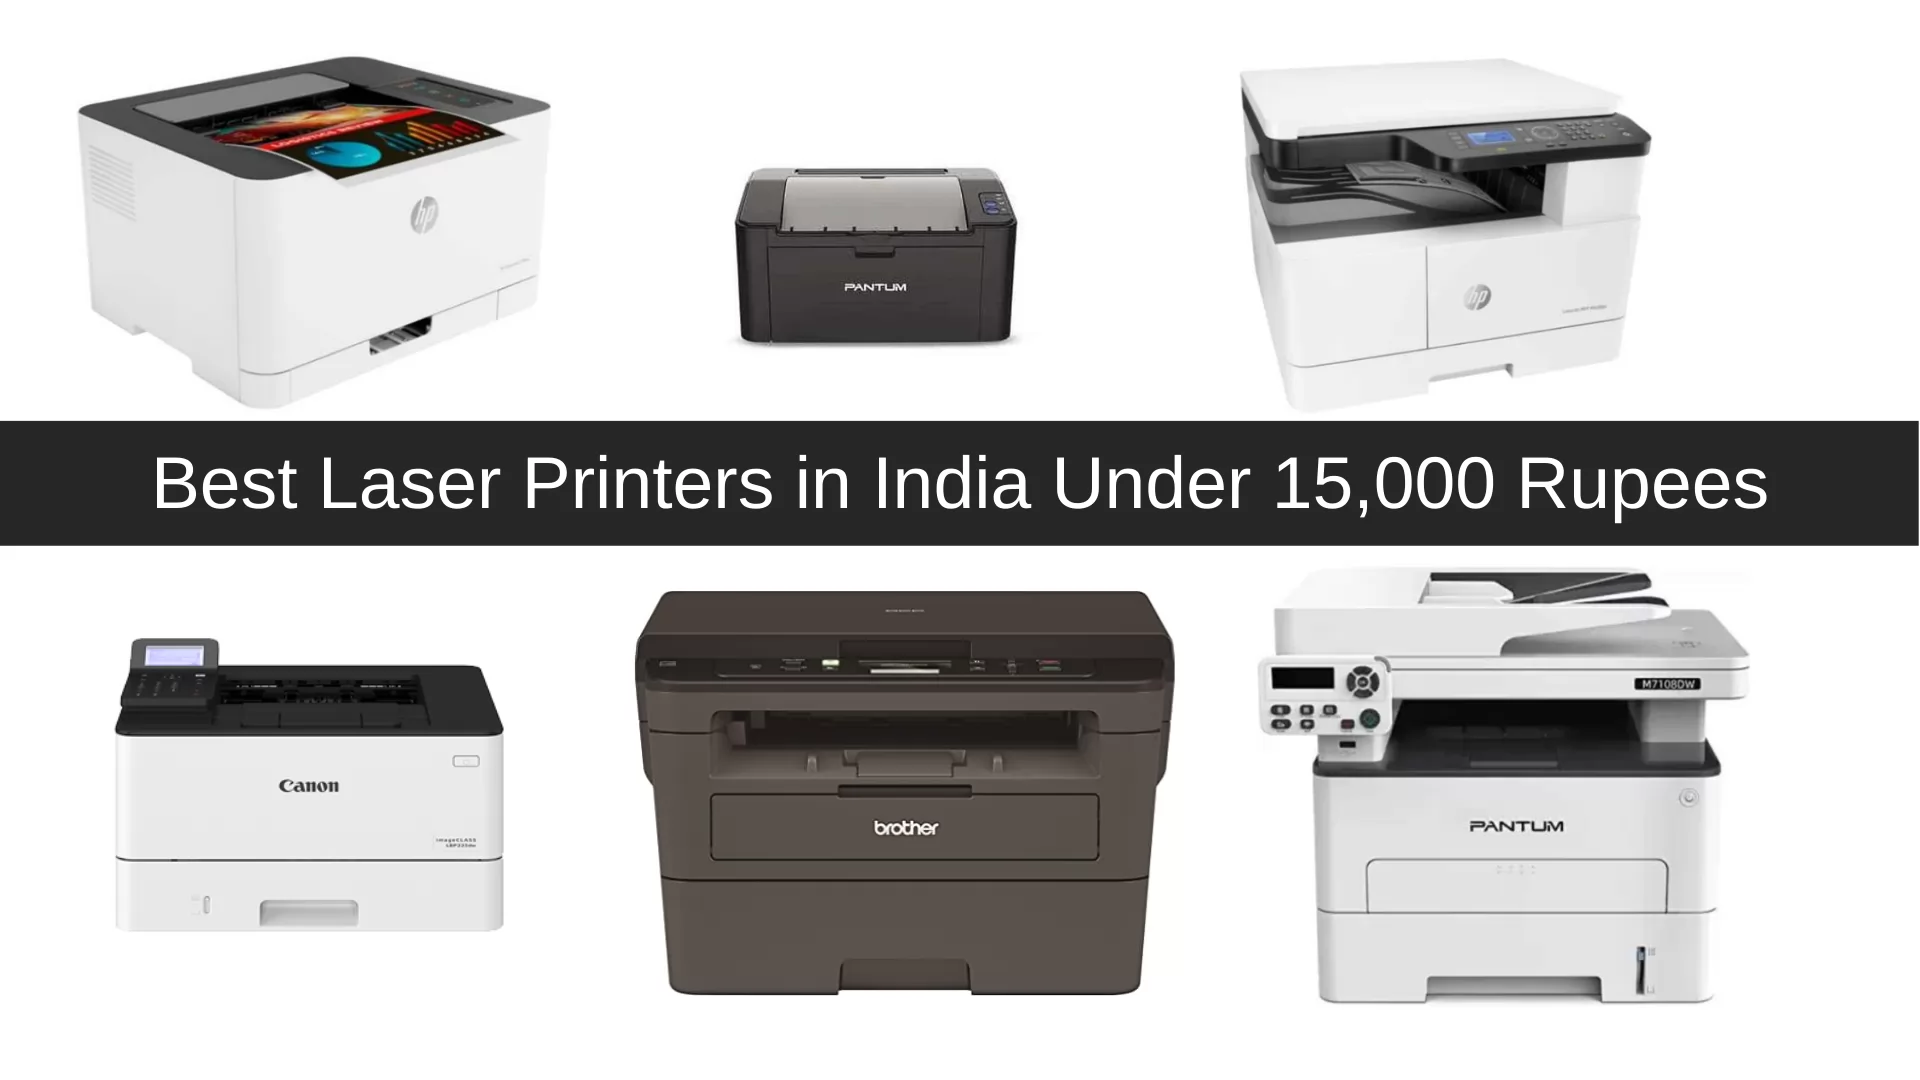 Best Laser Printers in India Under Rs 15,000